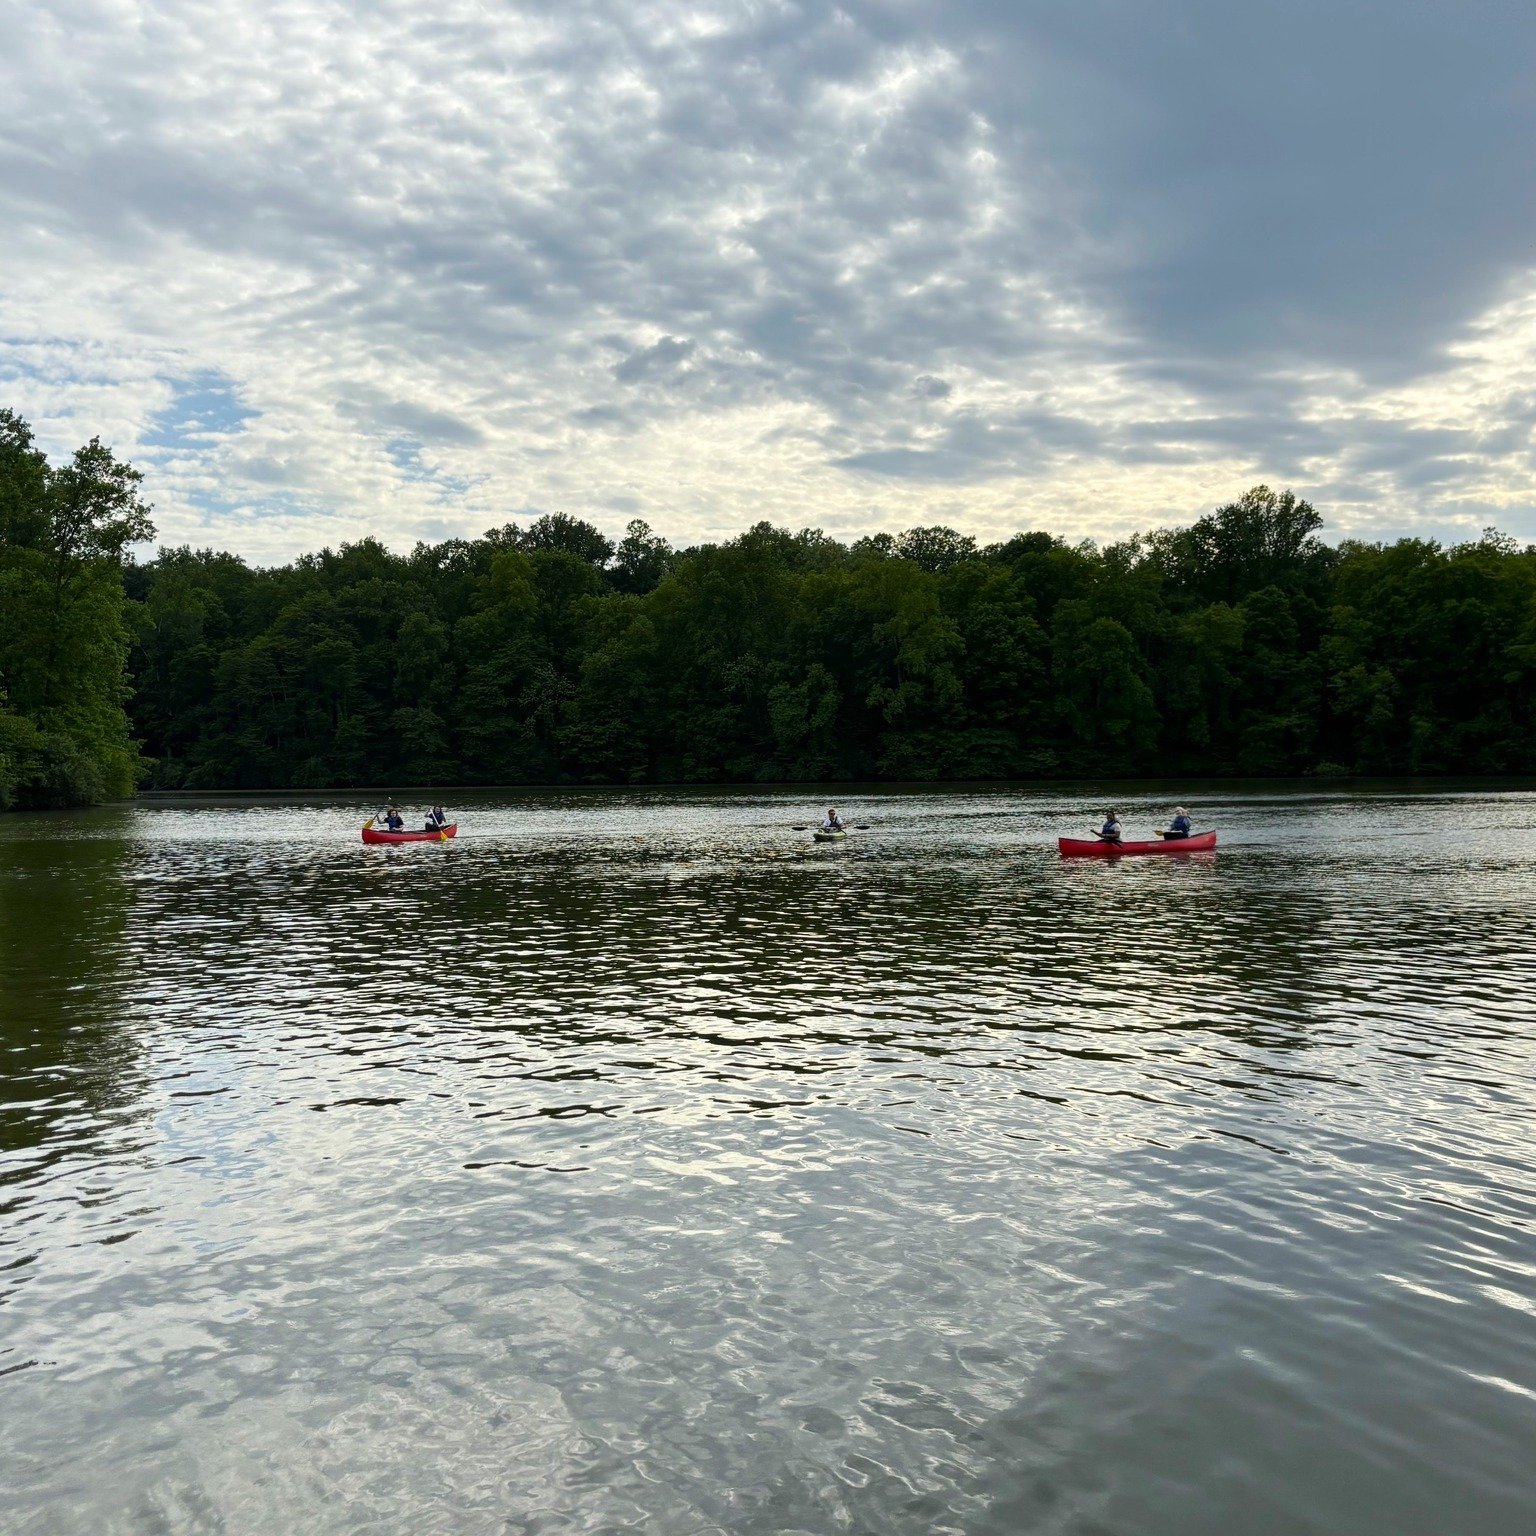 Building canoeing and camping skills.
🚣⛺️
A group of Trailblazer-level teens attended our second &quot;cruising school&quot; at Burnet Woods on Monday. These teens are candidates for our week-long advanced destination canoe and backcountry camping t